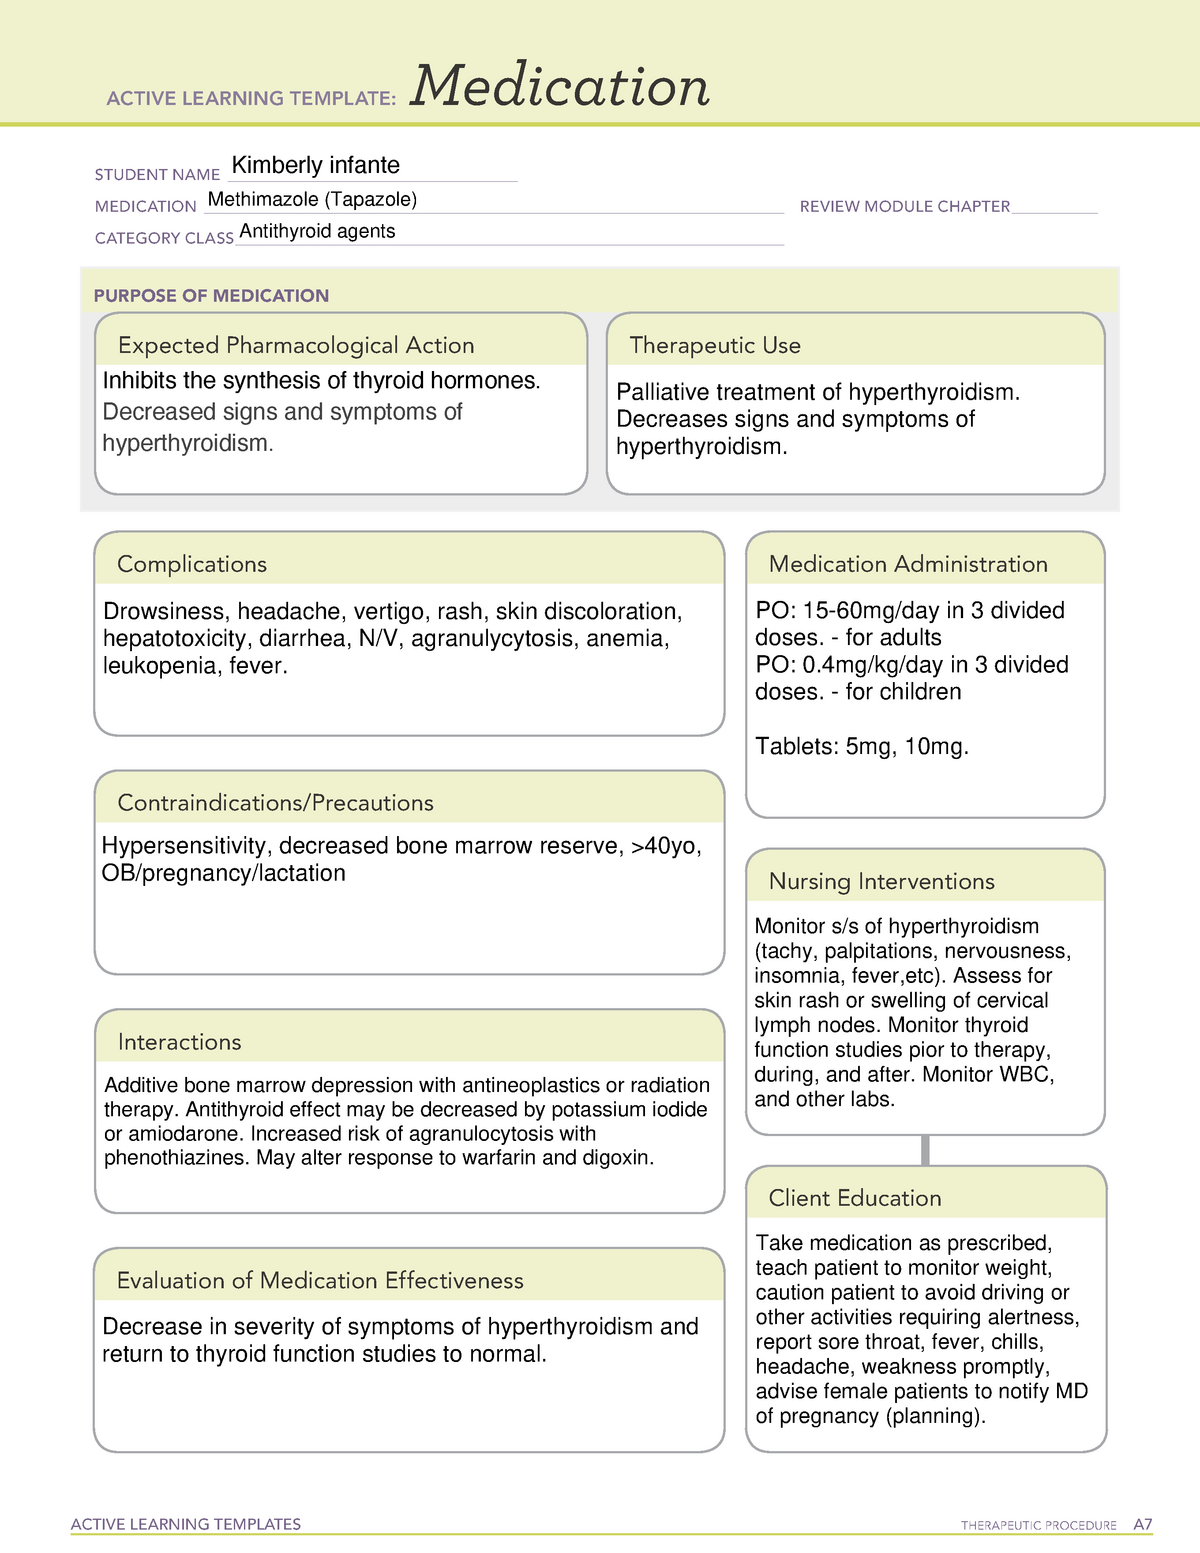 Methadone Medication Ati Template Active Learning Tem vrogue co